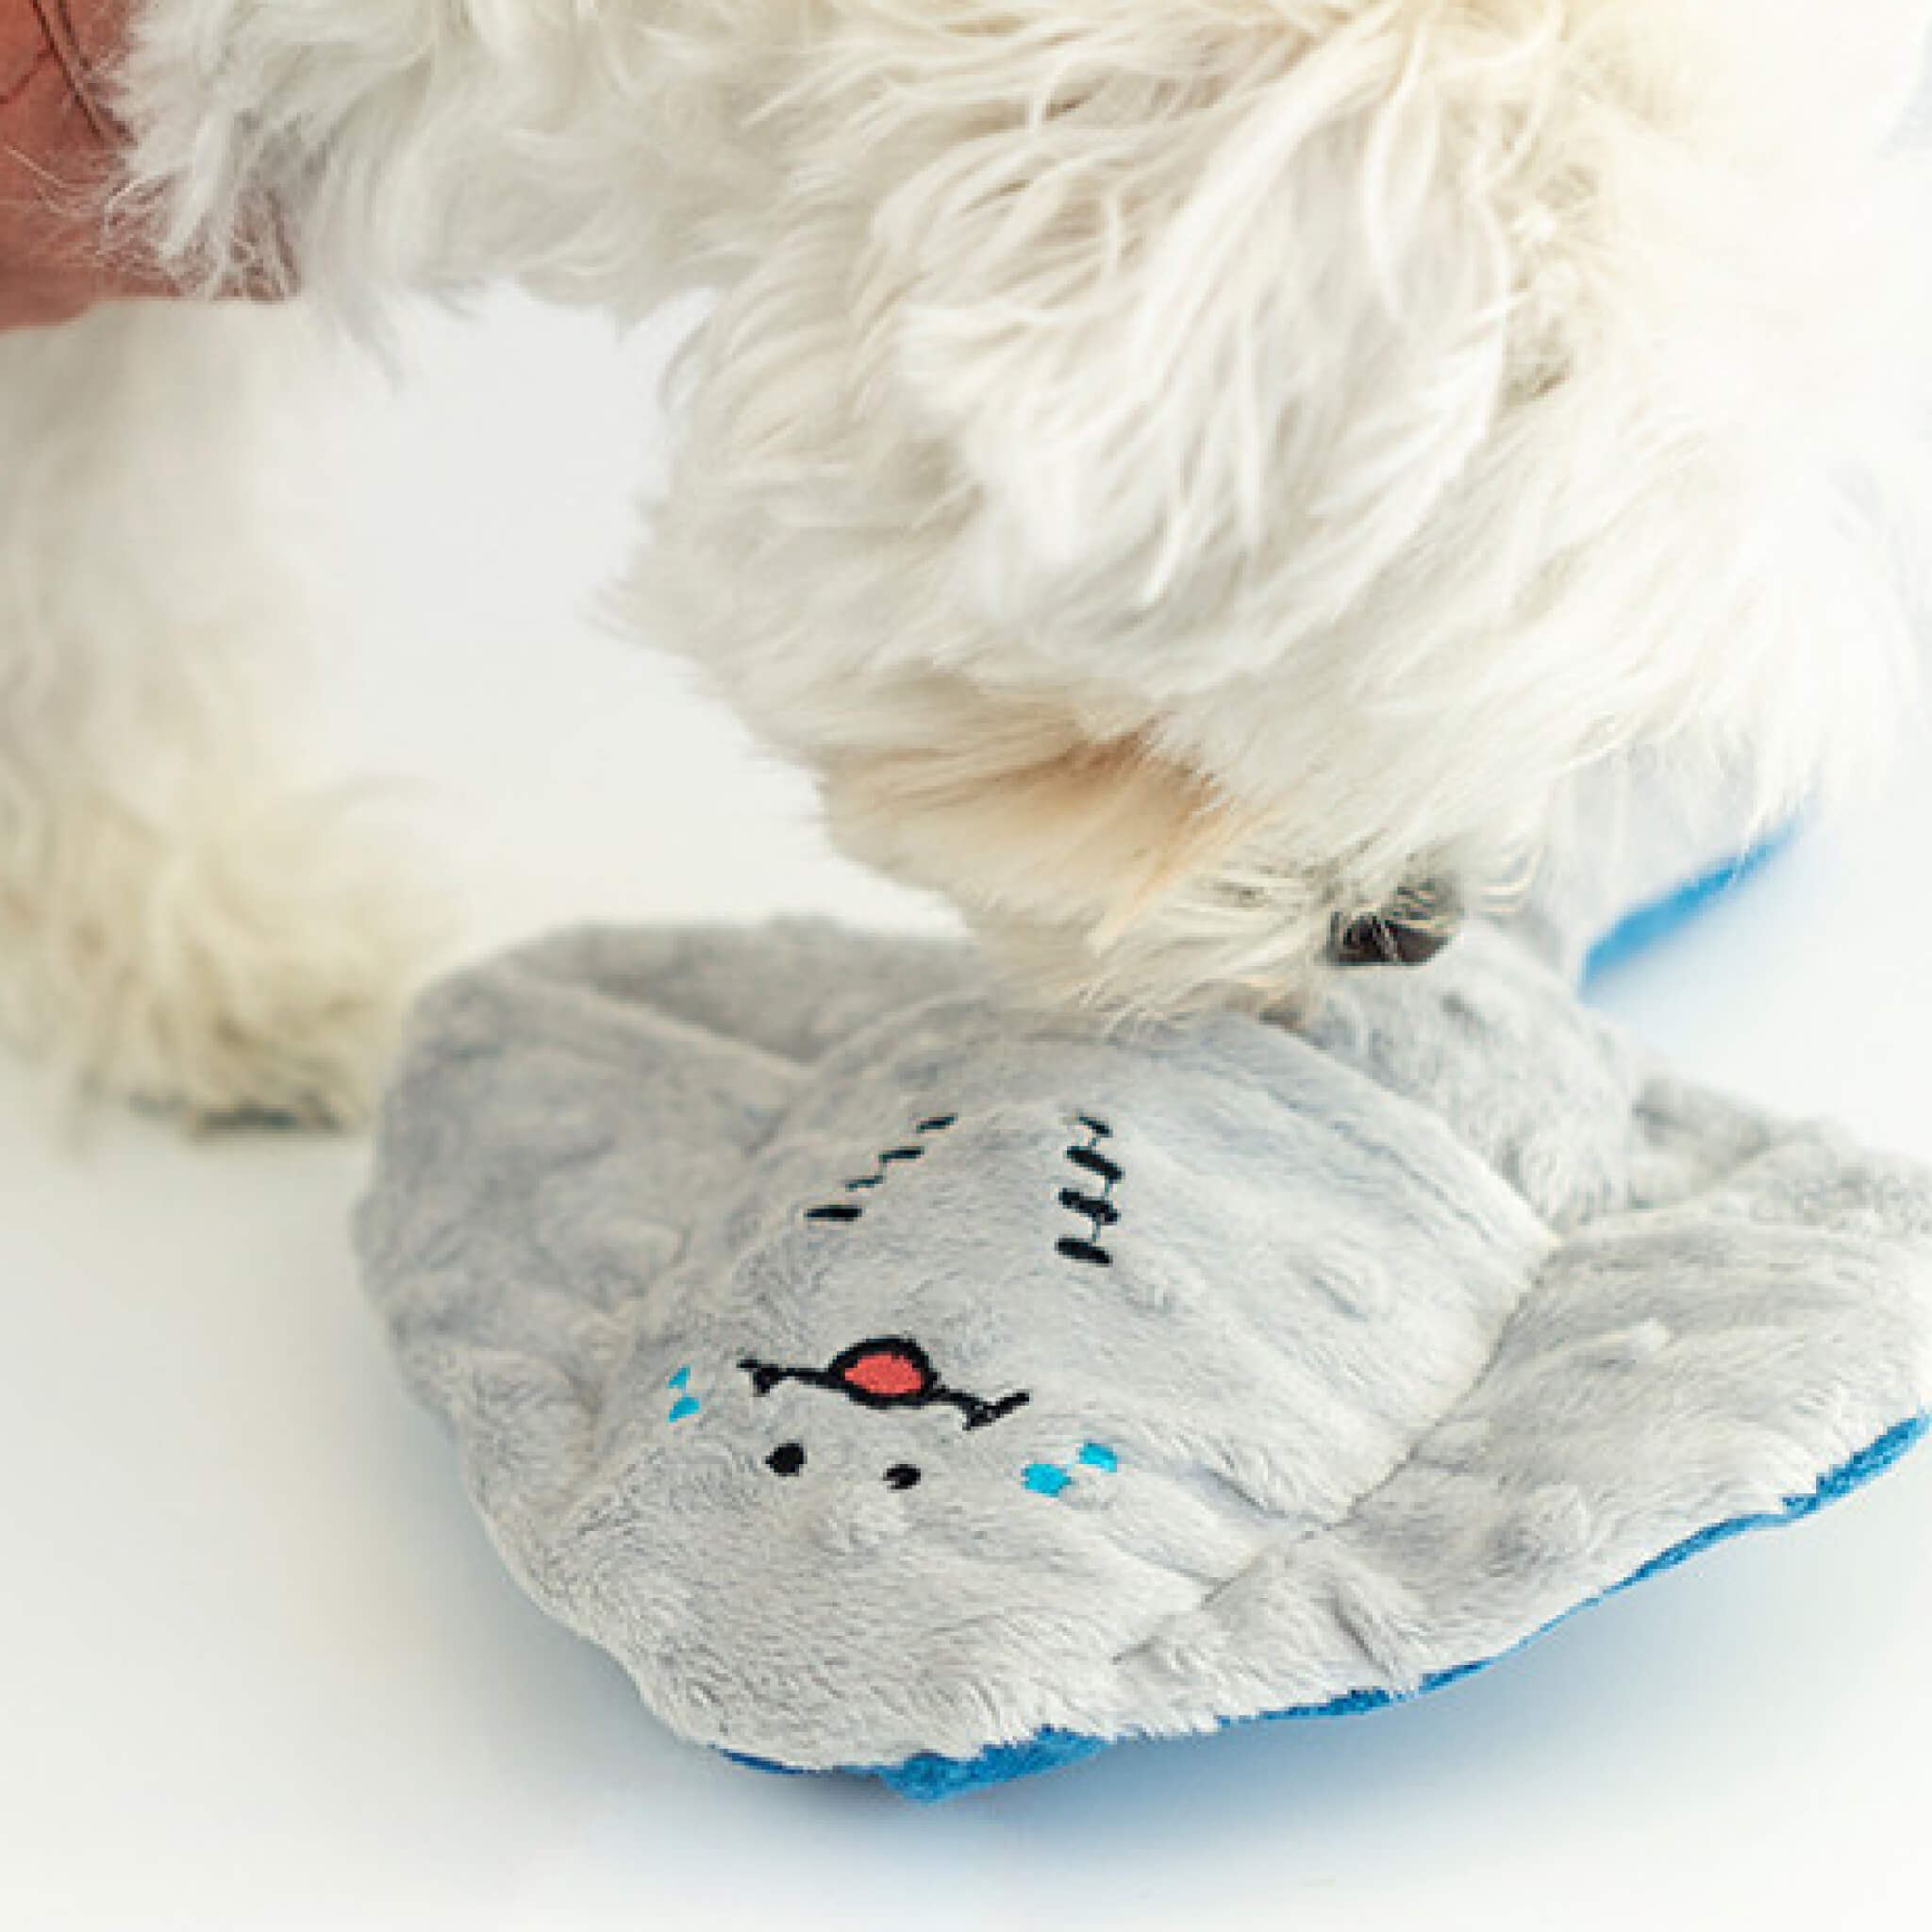 Dog with stingray nosework toy.